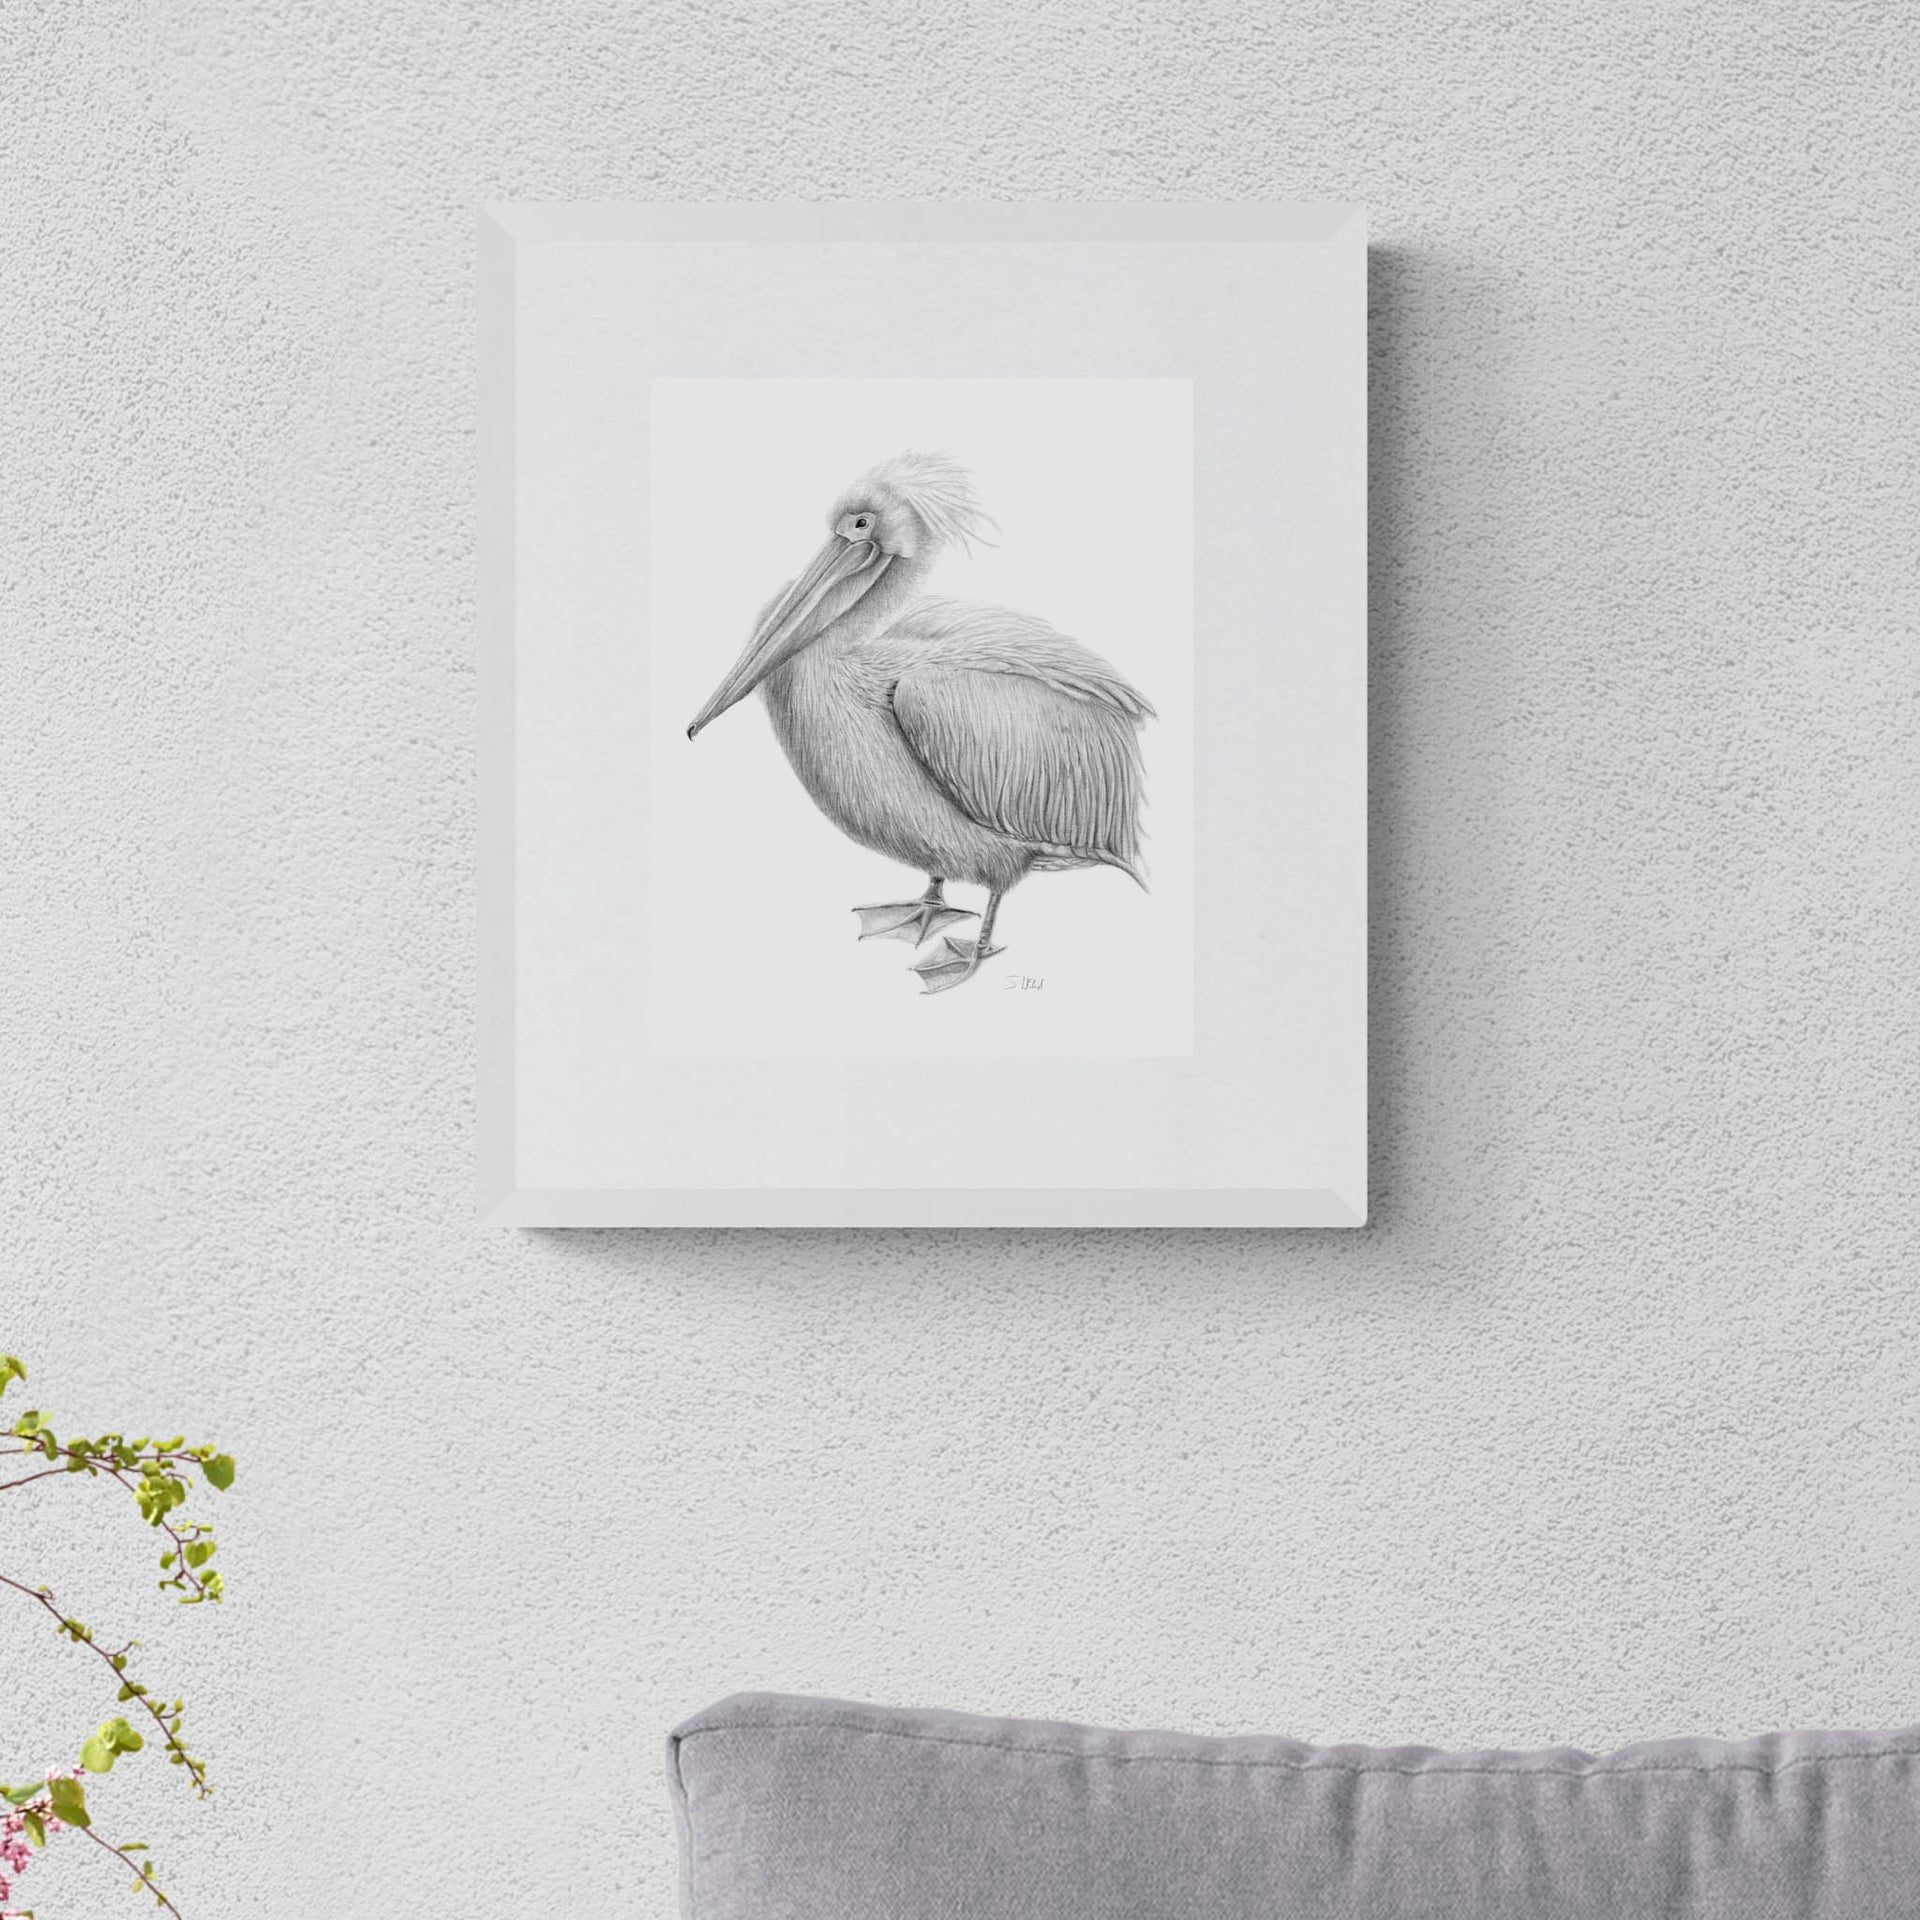 Pelican pencil drawing print in white frame on the wall